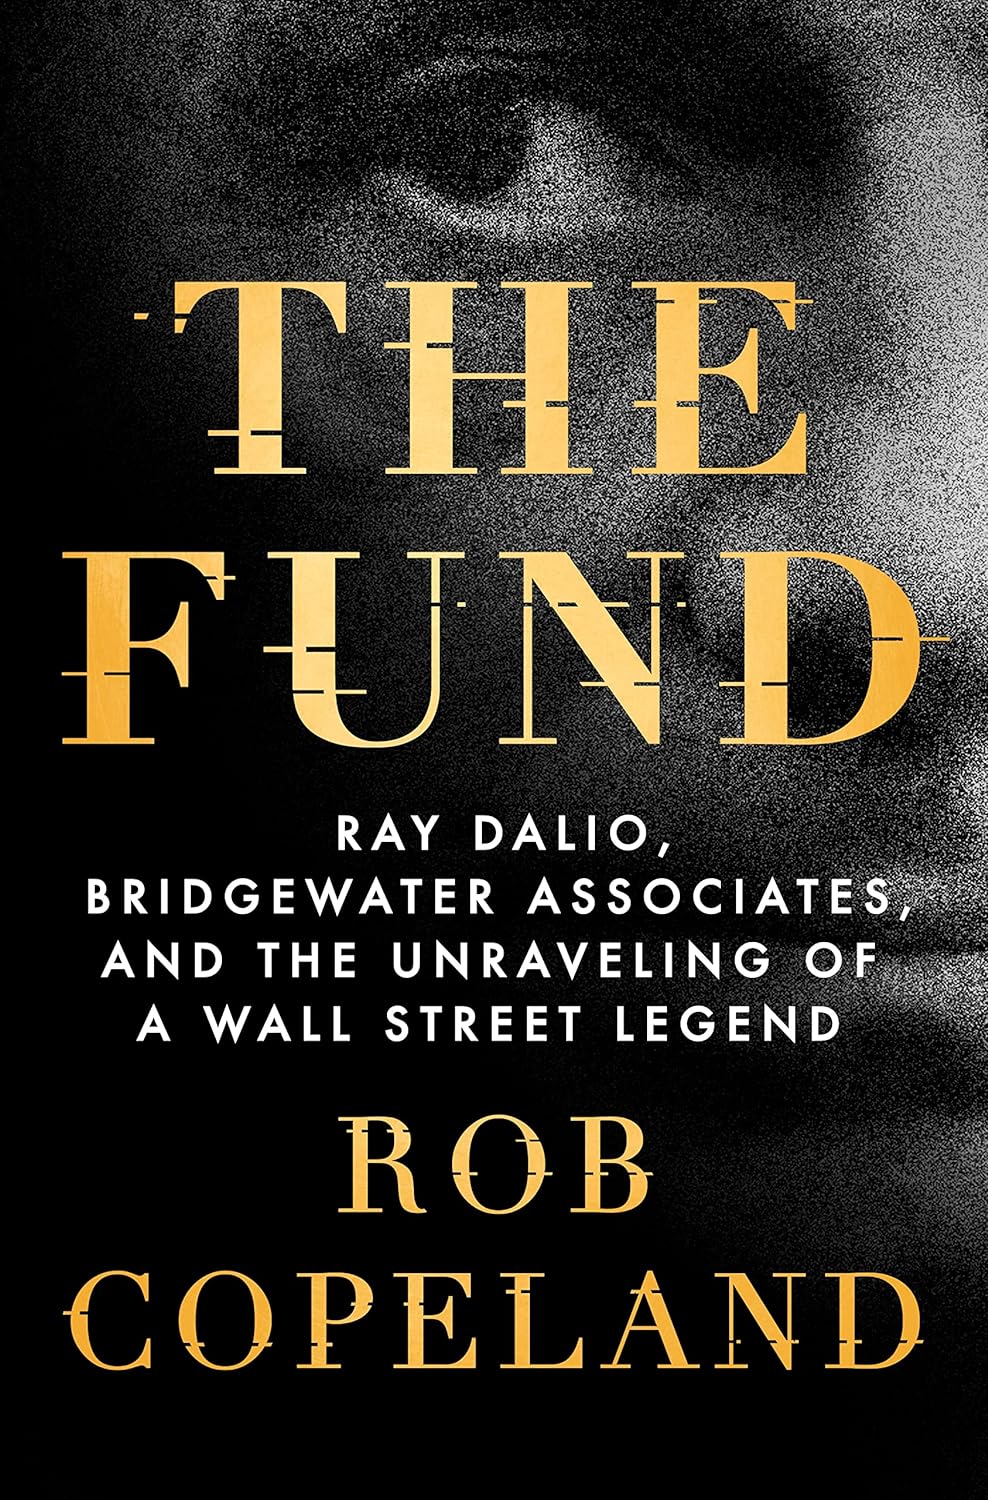 Book's I'm Reading: The Fund: Ray Dalio, Bridgewater Associates, and the Unraveling of a Wall Street Legend